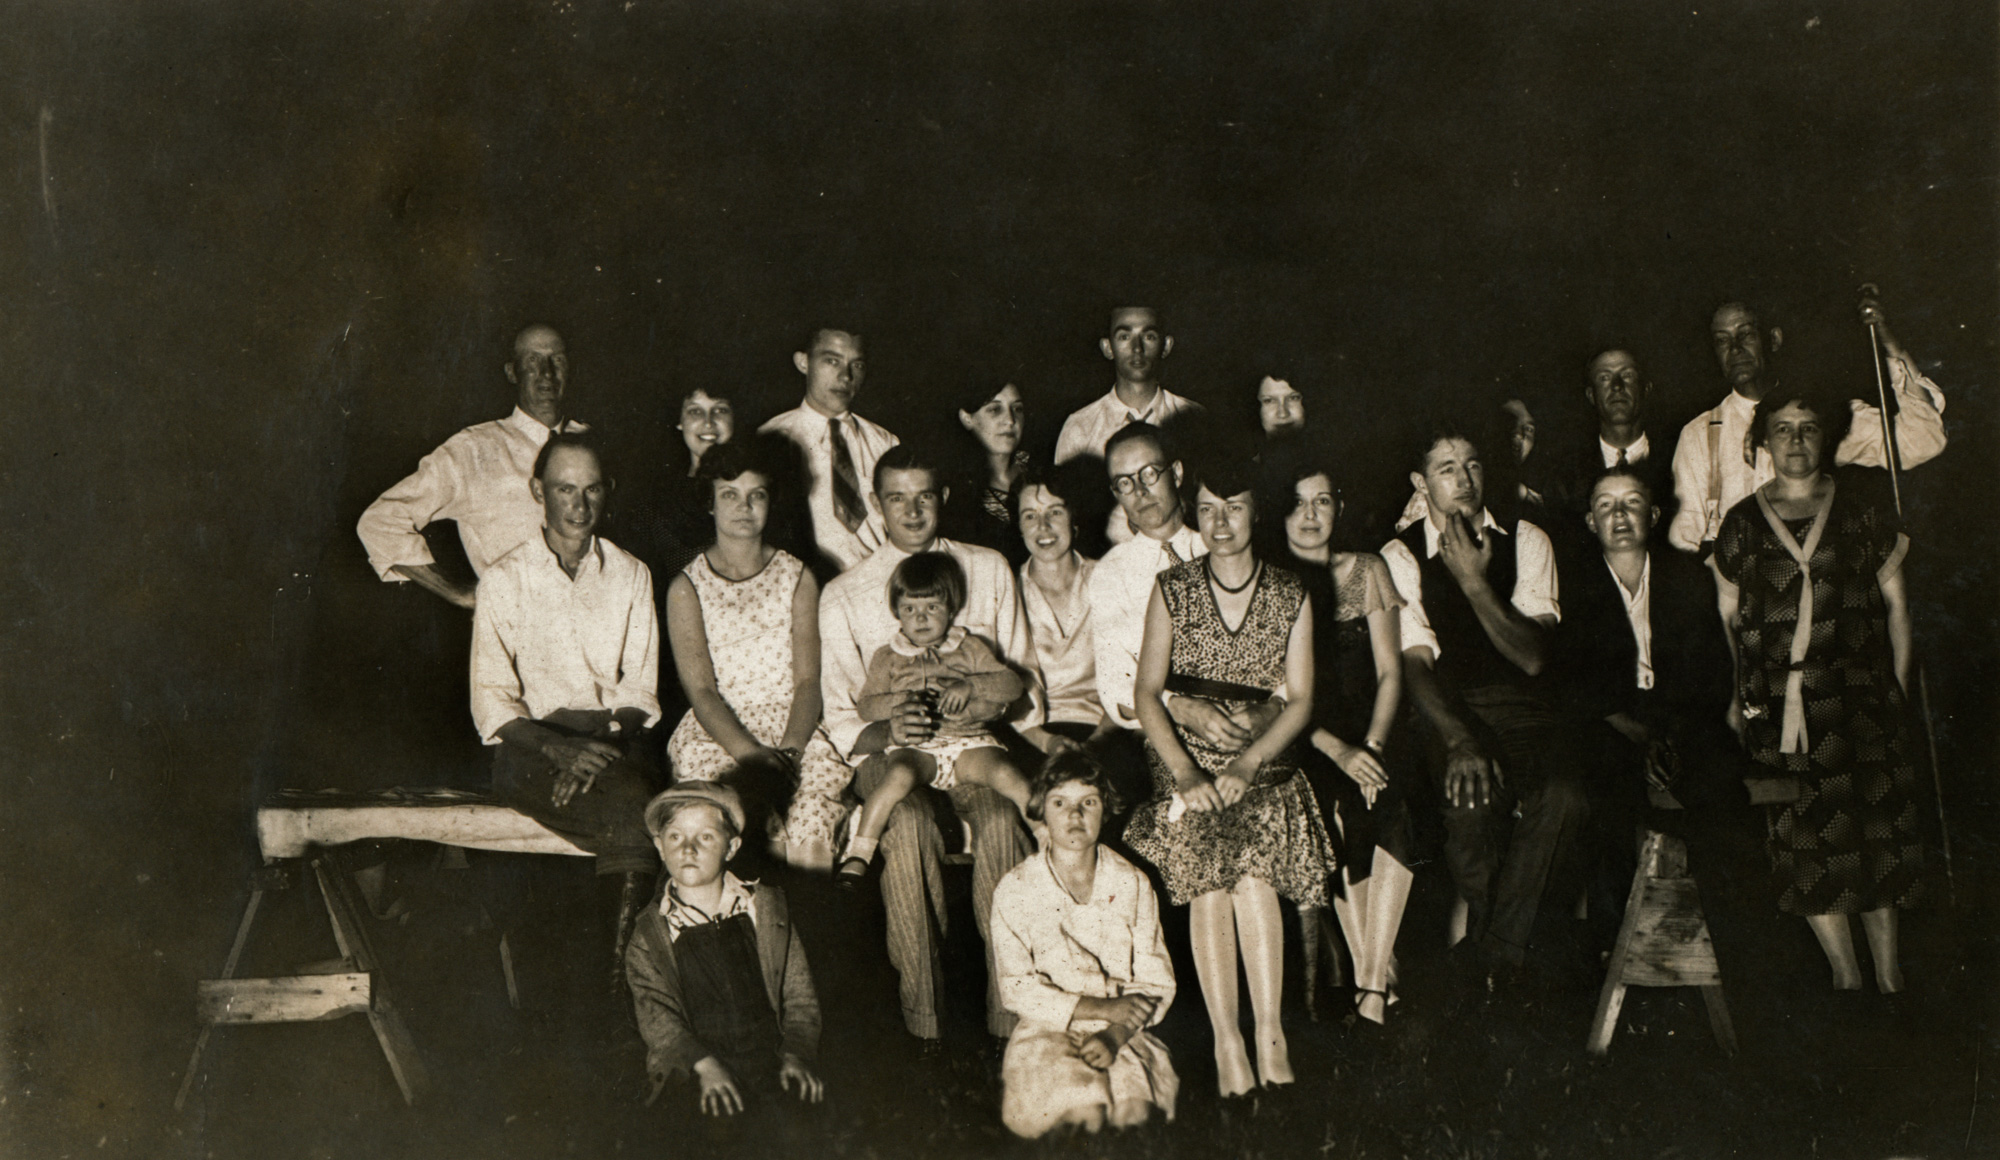 Dauth Family Archive - Circa 1920 - June Dauth With Unknown Group